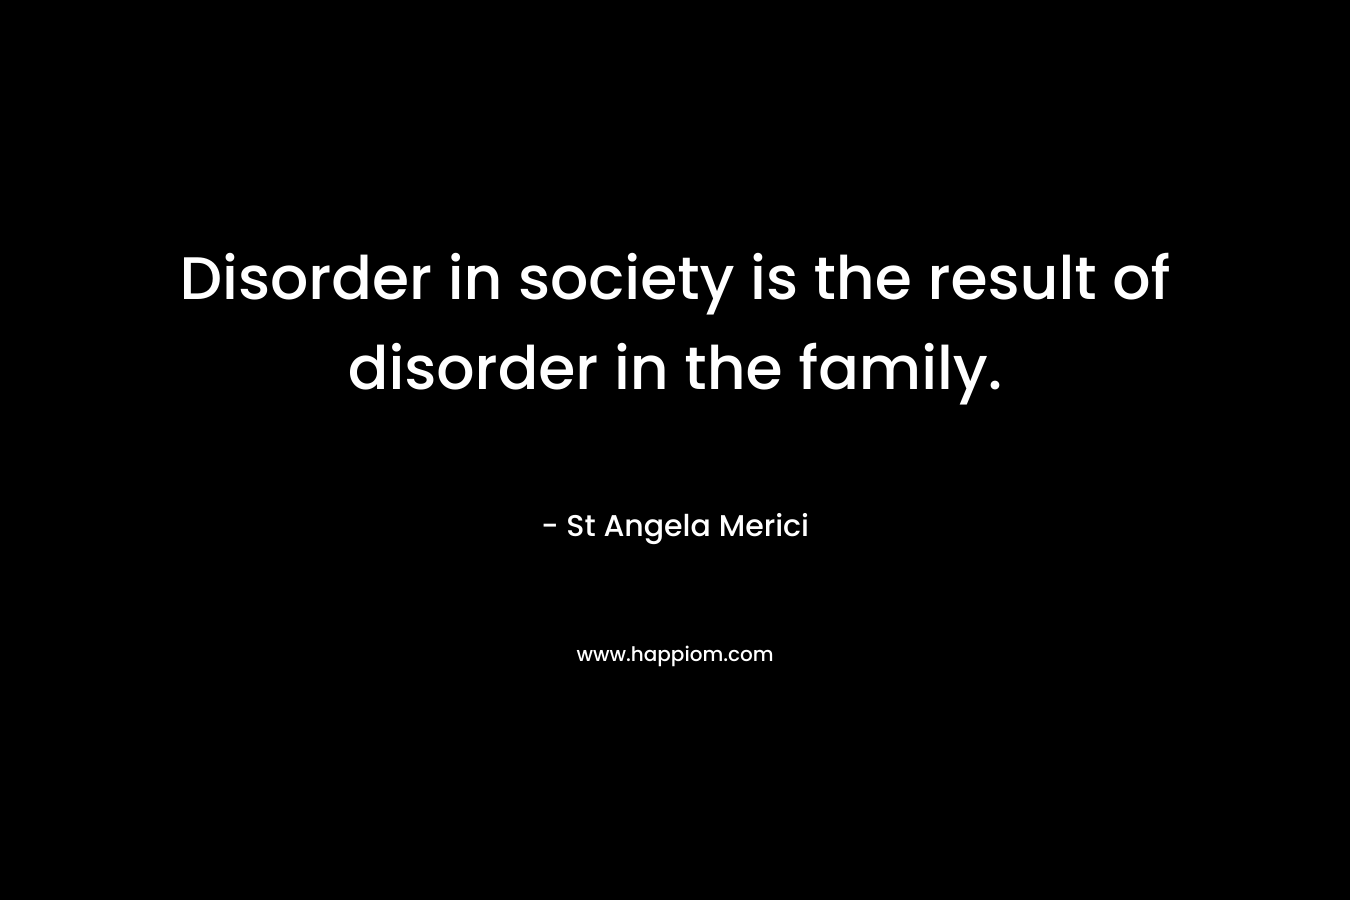 Disorder in society is the result of disorder in the family.